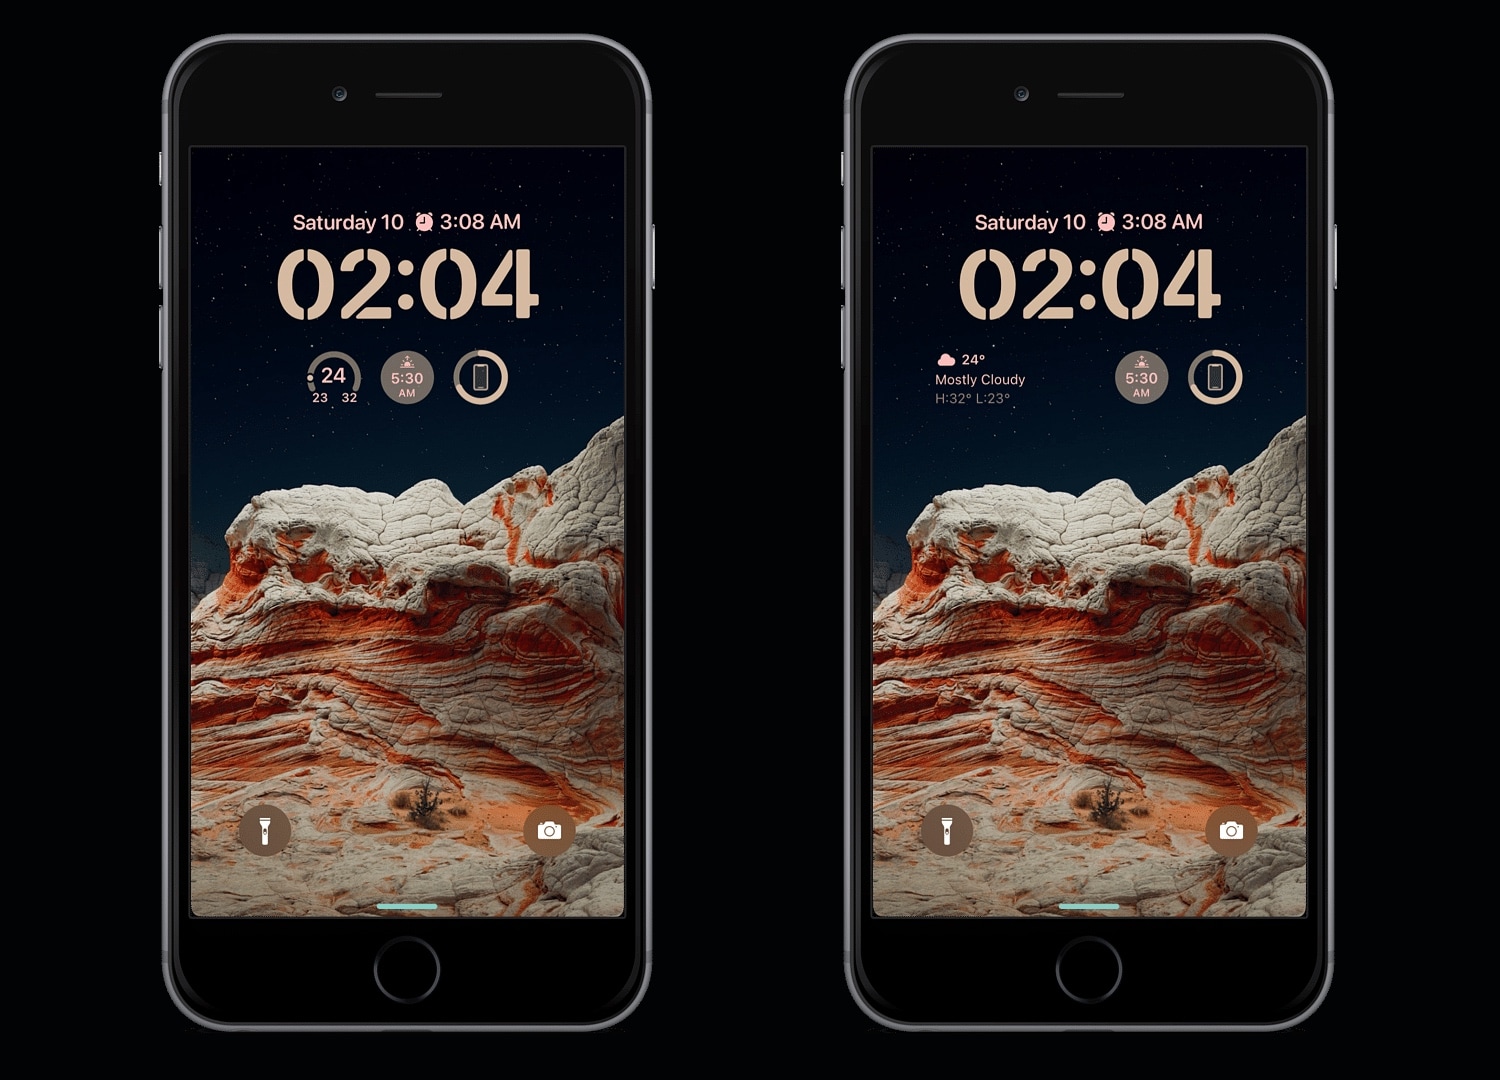 AIM brings the iOS 16 Lock Screen to jailbroken devices.